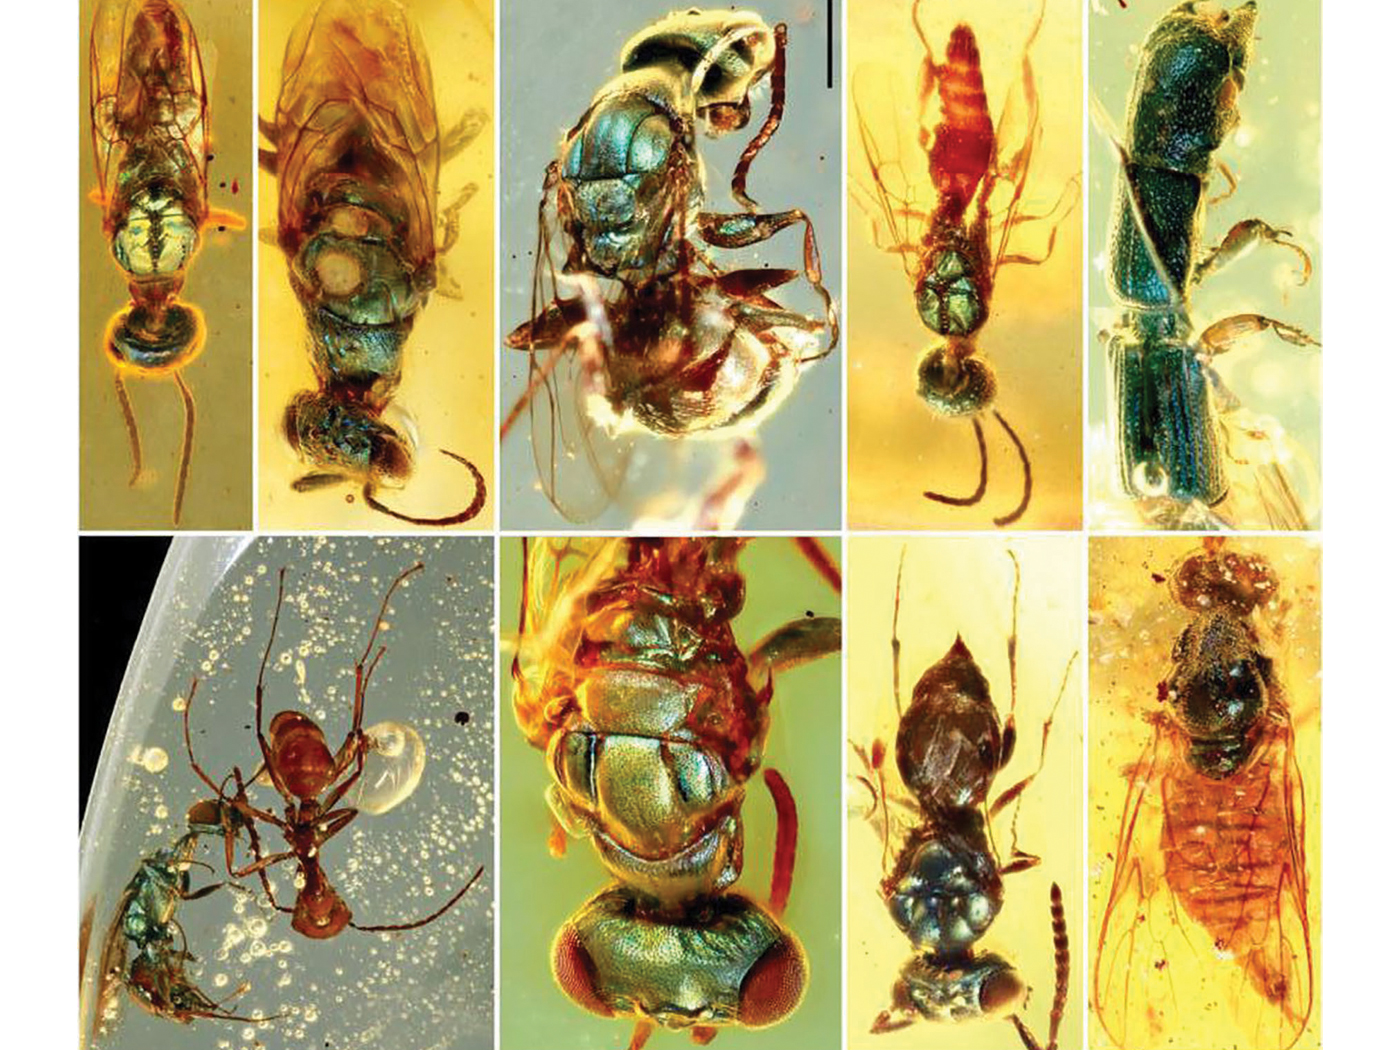 How did jewel beetles' visual systems evolve? •